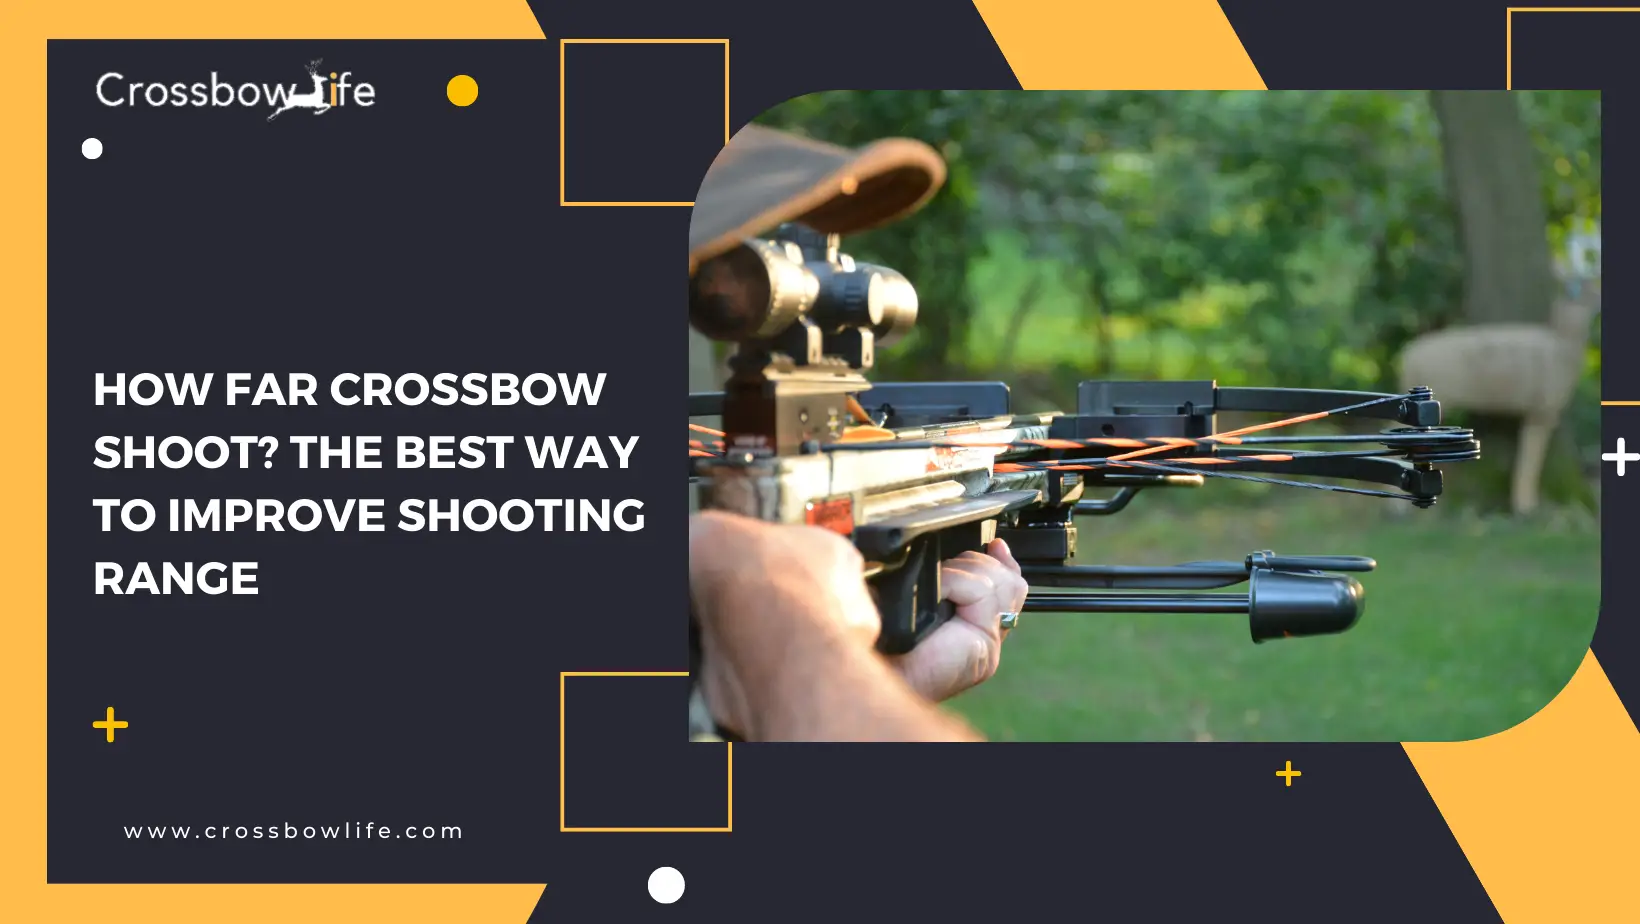 How far crossbow shoot? The best way to Improve Shooting Range